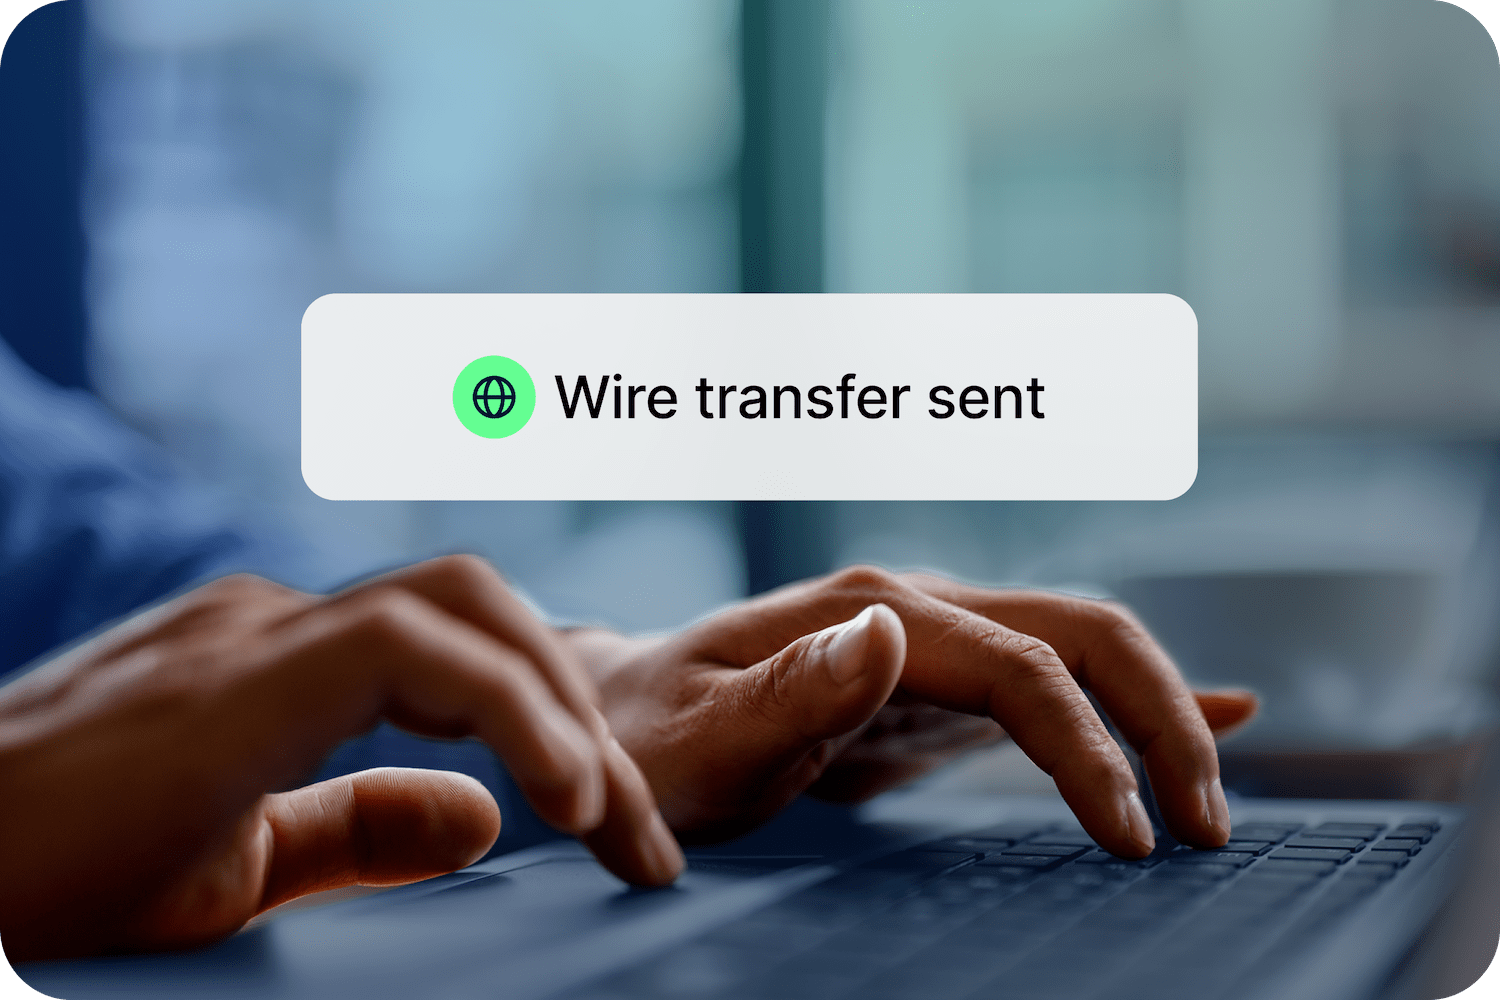 Someone sends a wire transfer on a laptop